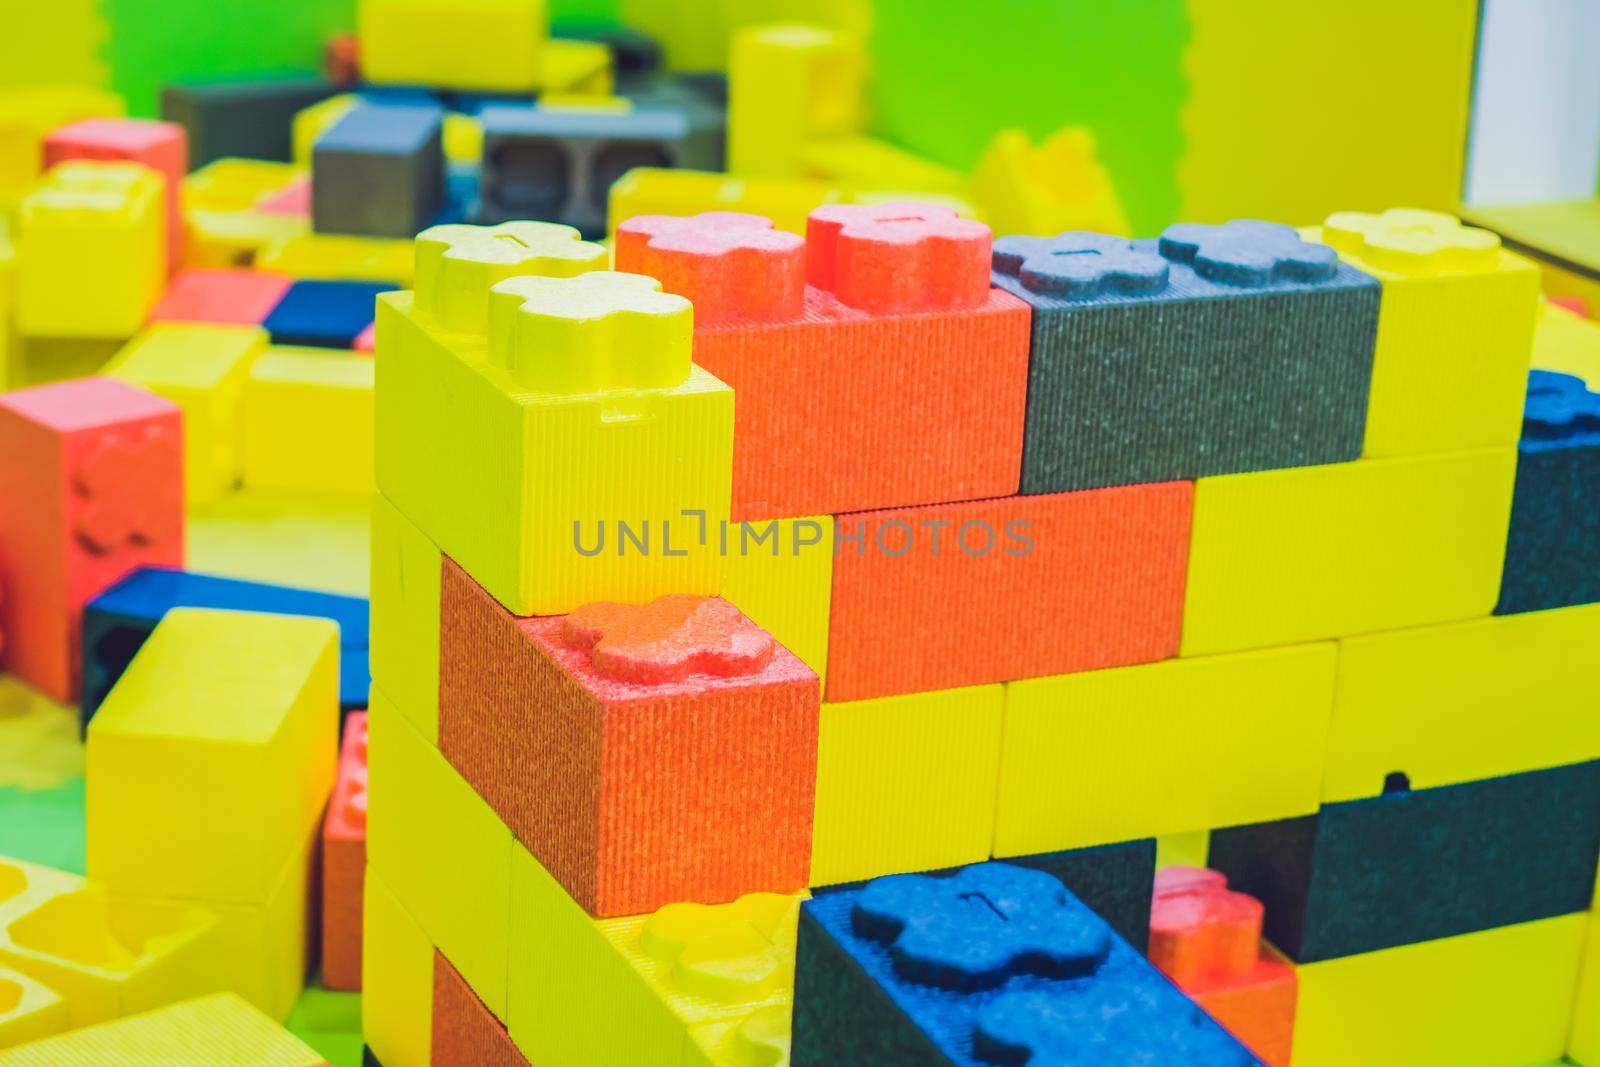 Kids toy house made of colorful blocks.